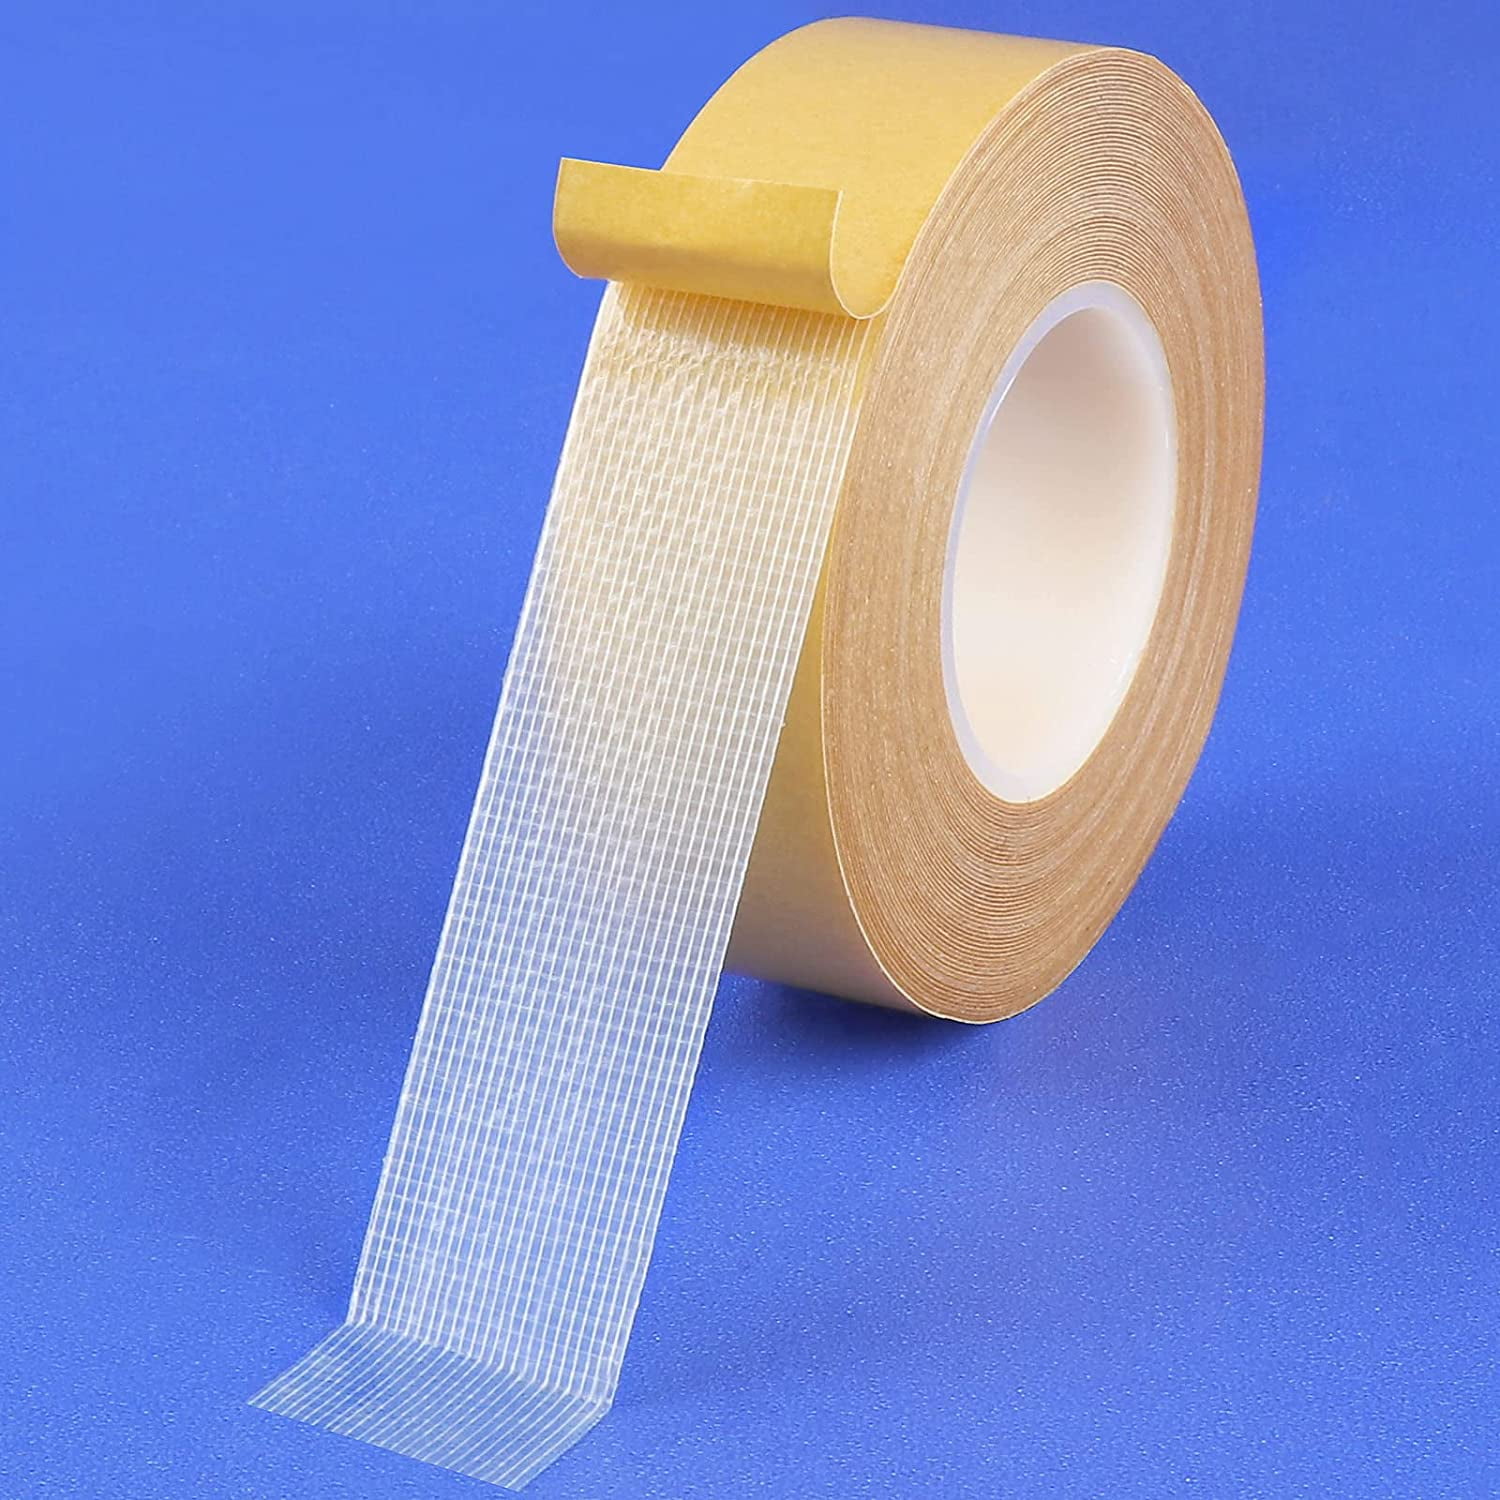 1 Roll Double Sided Tape Heavy Duty, Universal High Tack Strong Wall  Adhesive with Fiberglass Mesh, Super Sticky Resistente Clear Tape, Easy Use  Transparent Tape